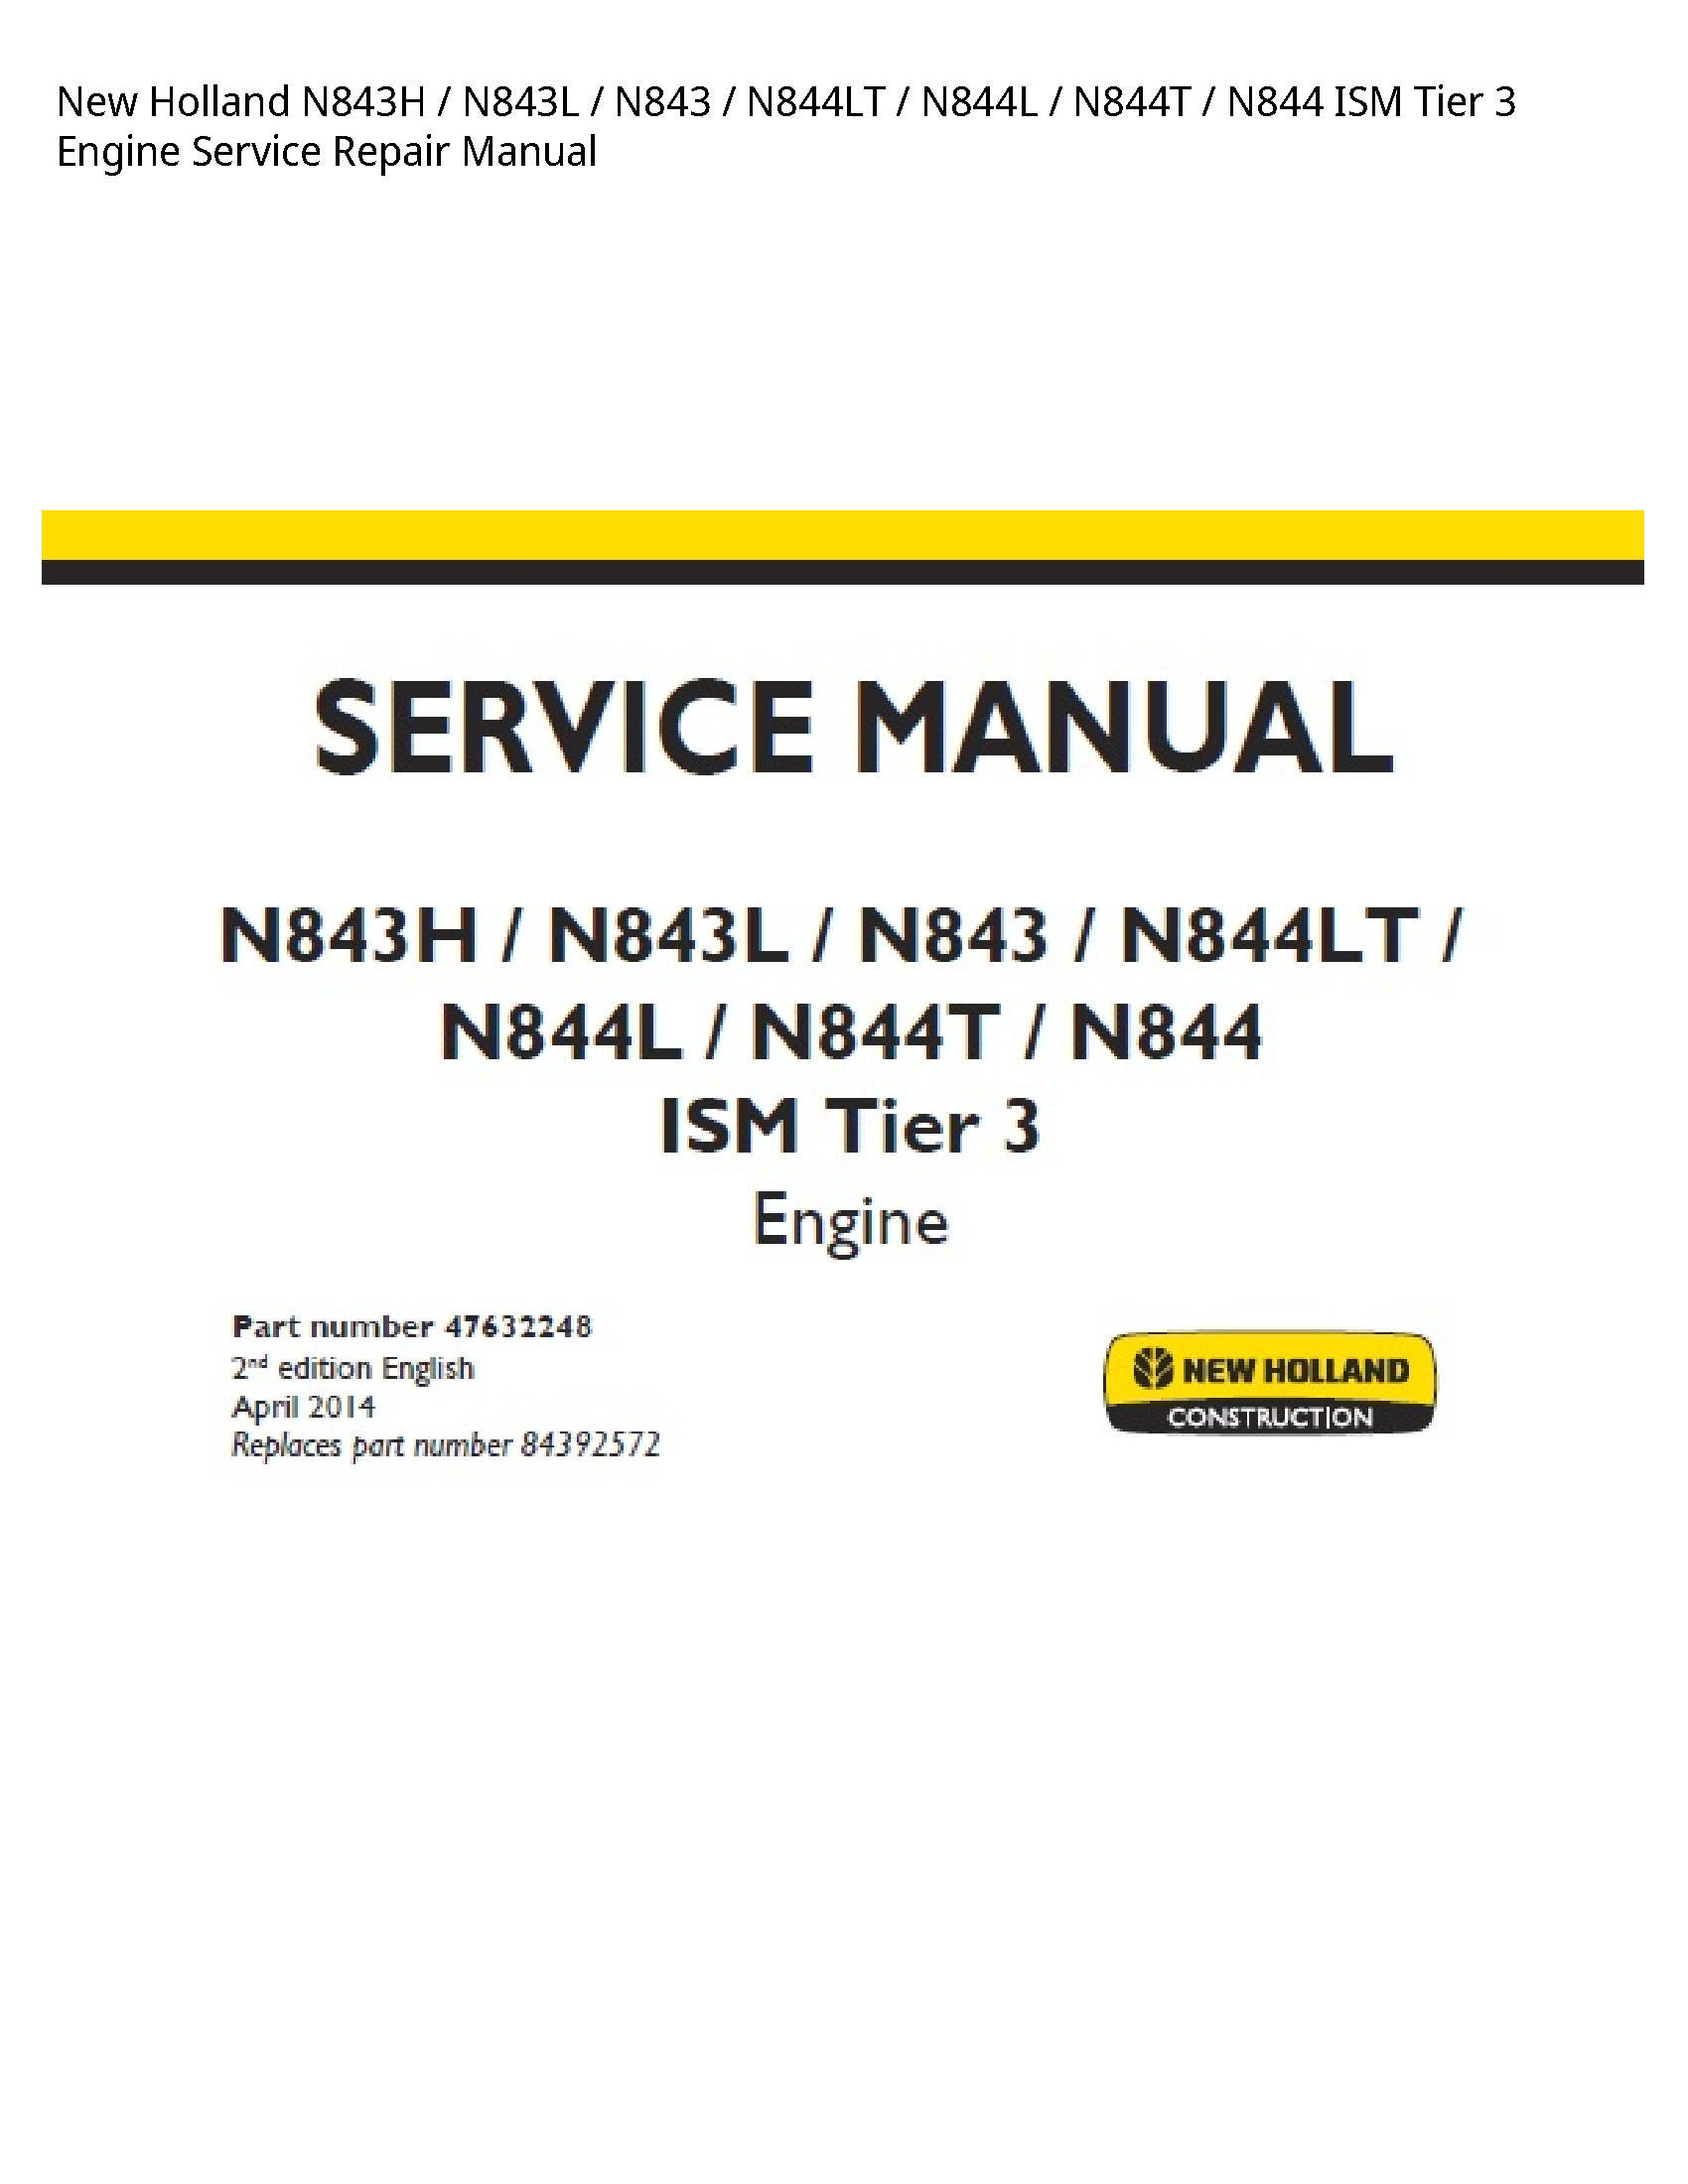 New Holland N843H ISM Tier Engine manual